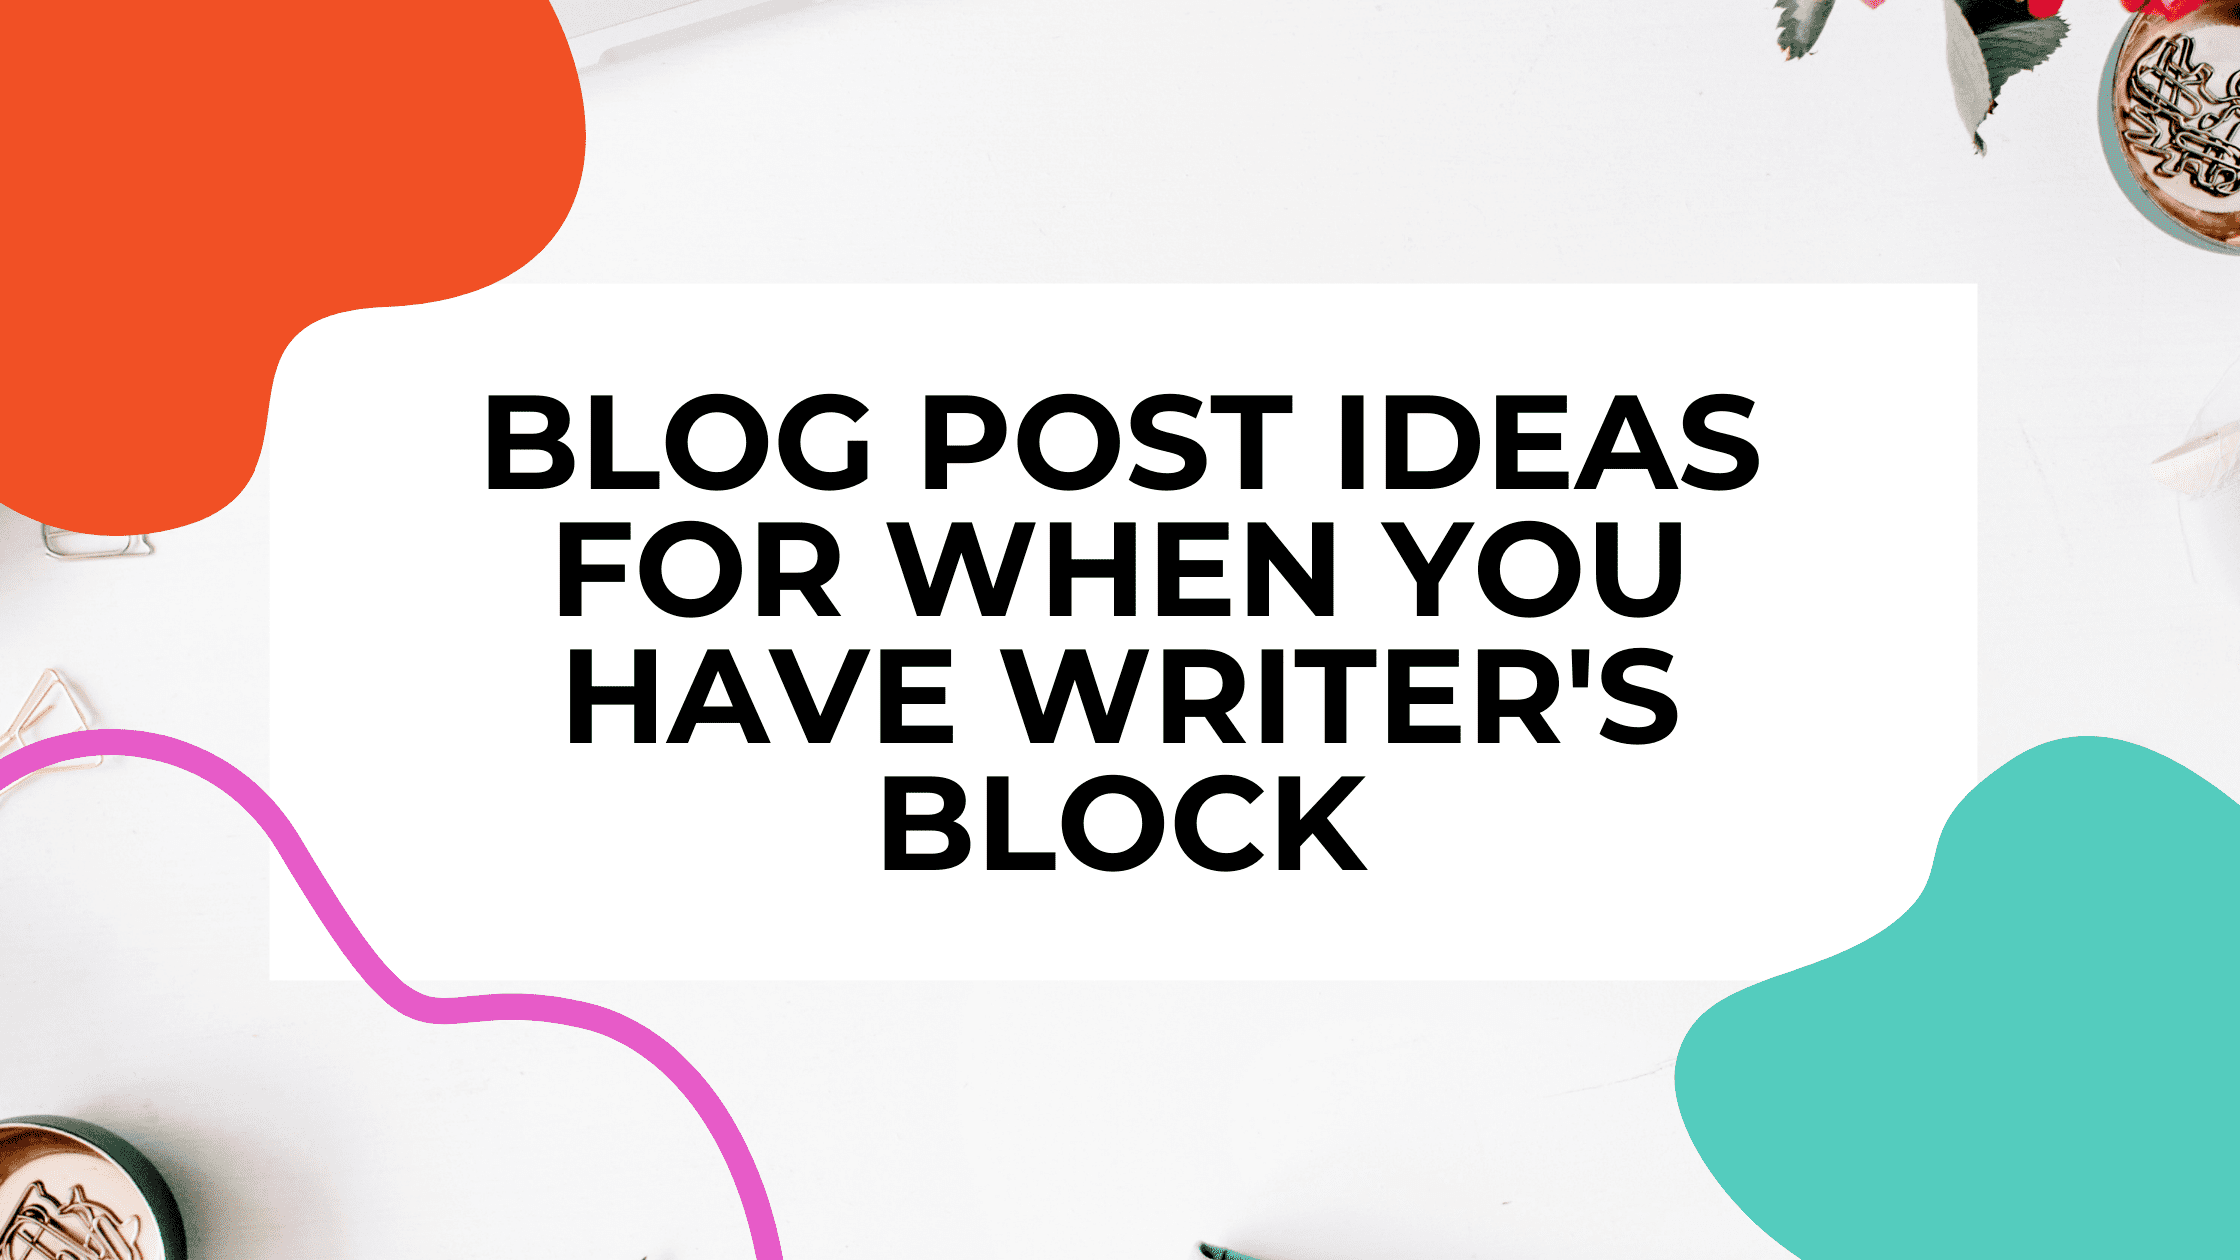 Items on a desk with paperclips and text overlay that reads: blog post ideas for when you have writer's block